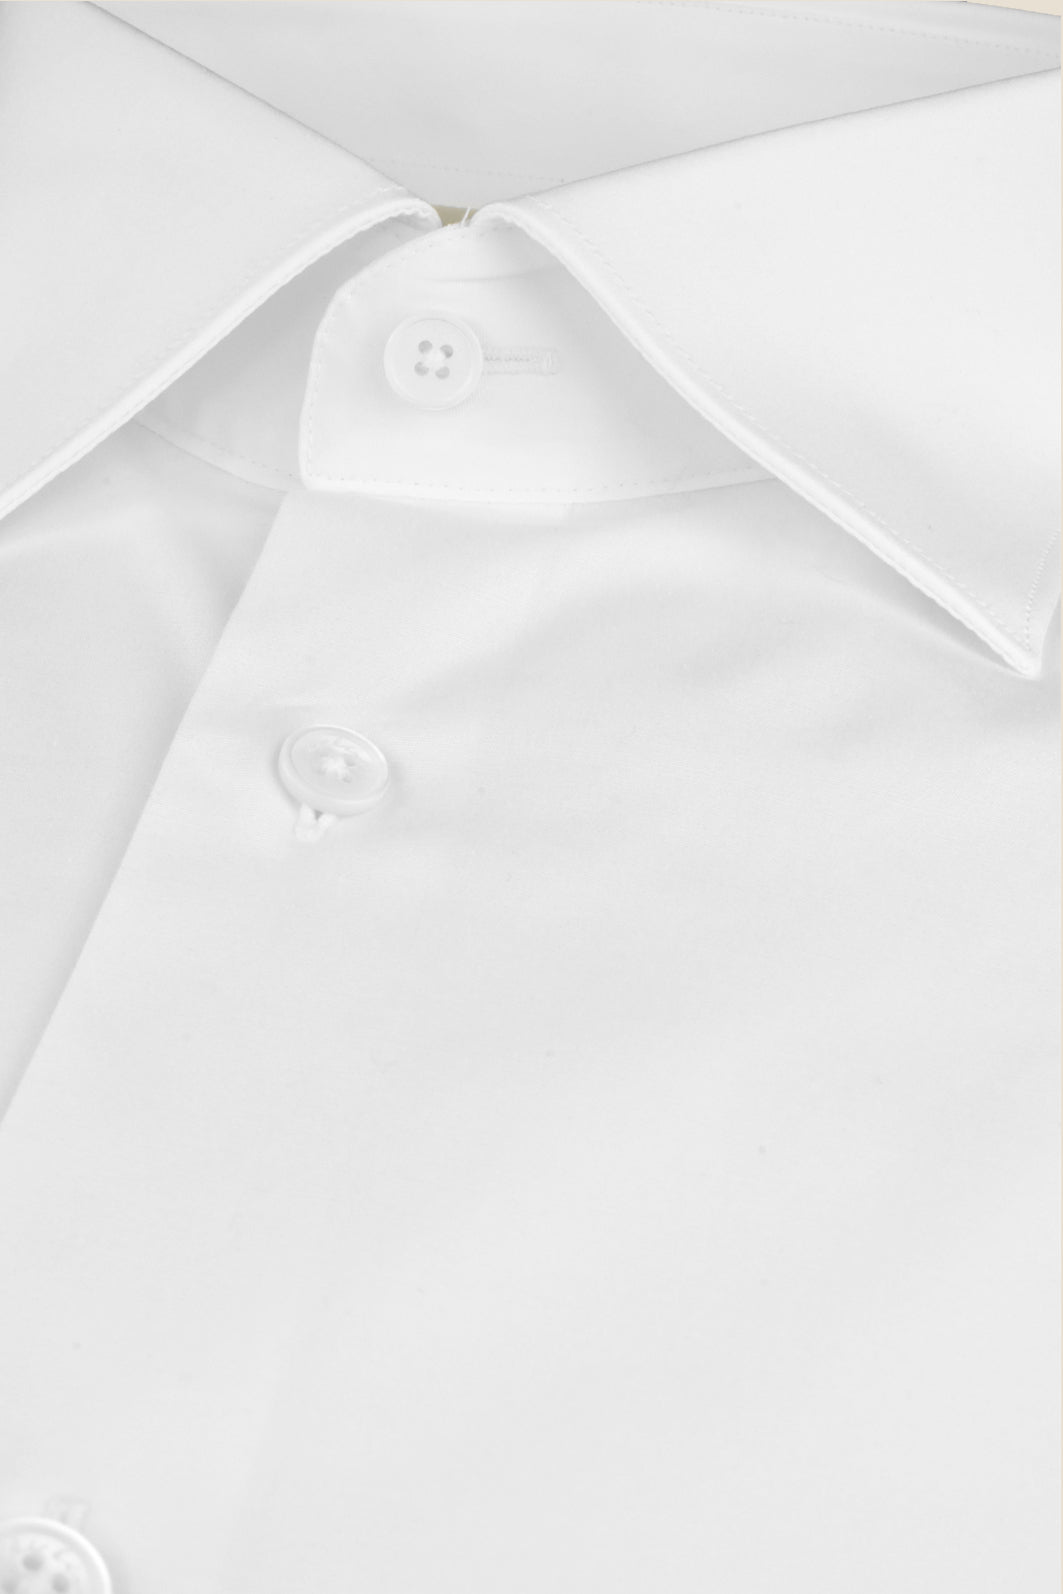 White business shirt made of organic cotton with a classic shark collar and 2% elastane - Made to order